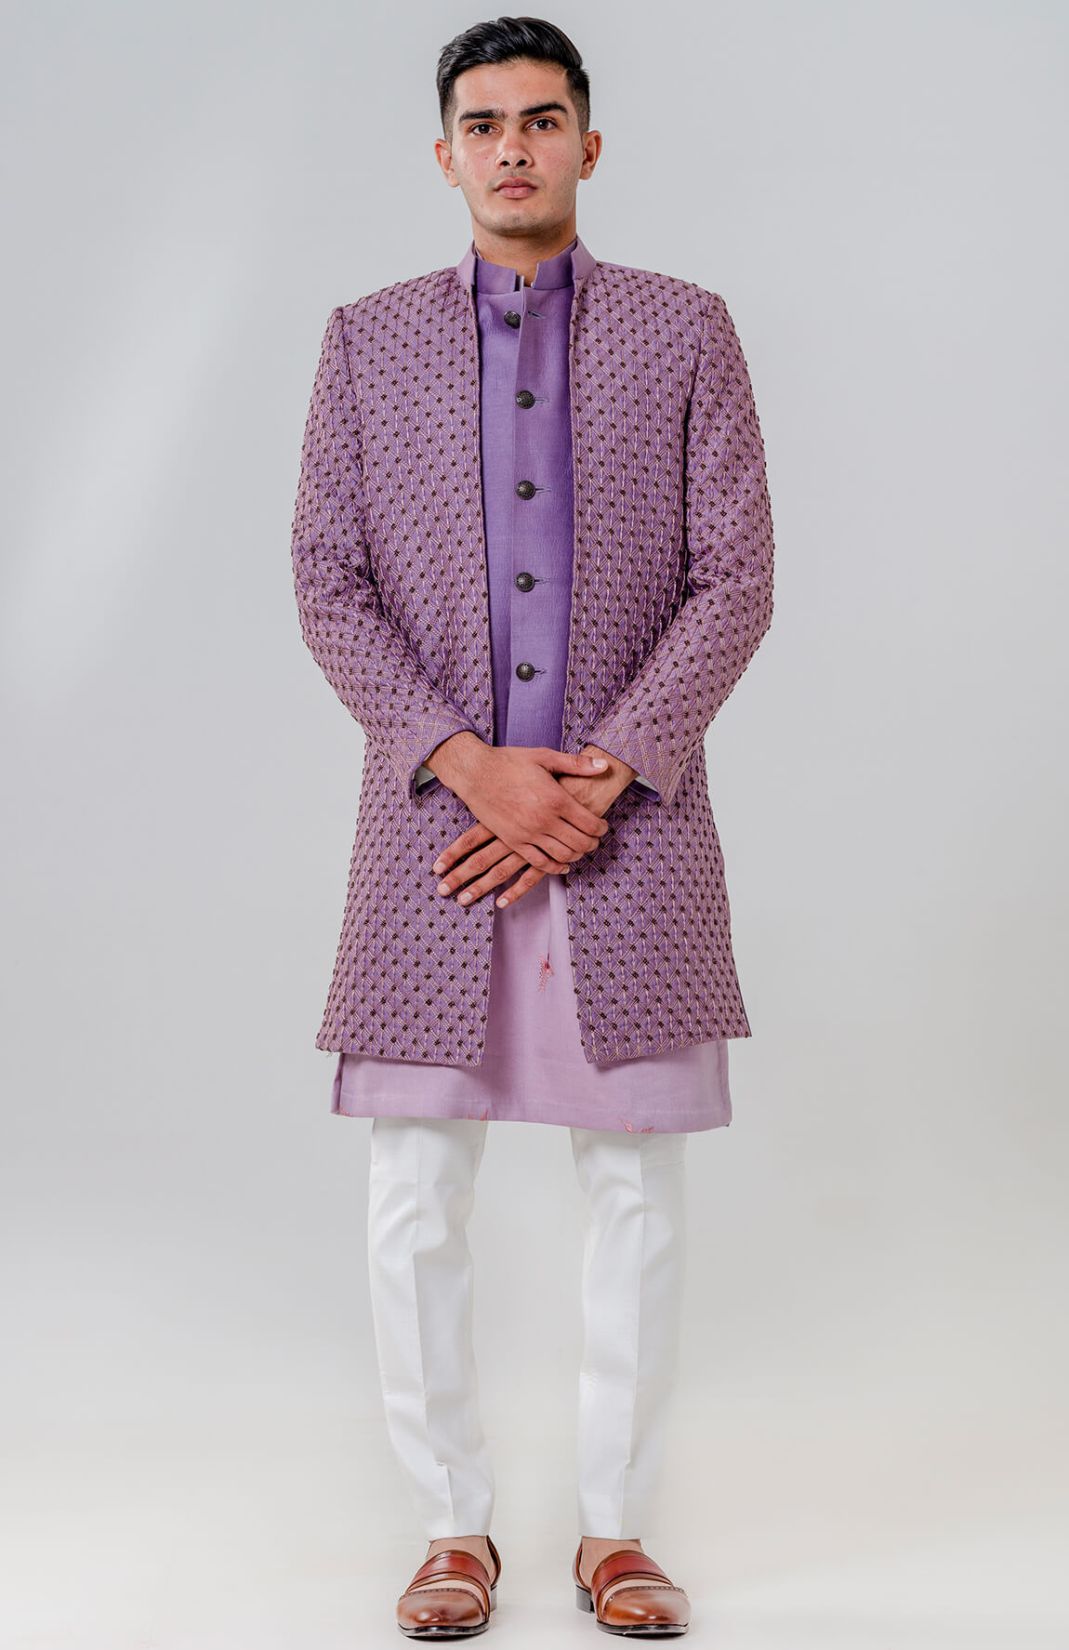 Long Open Jacket Attached Nehru Jacket Paired With Kurta & Trousers